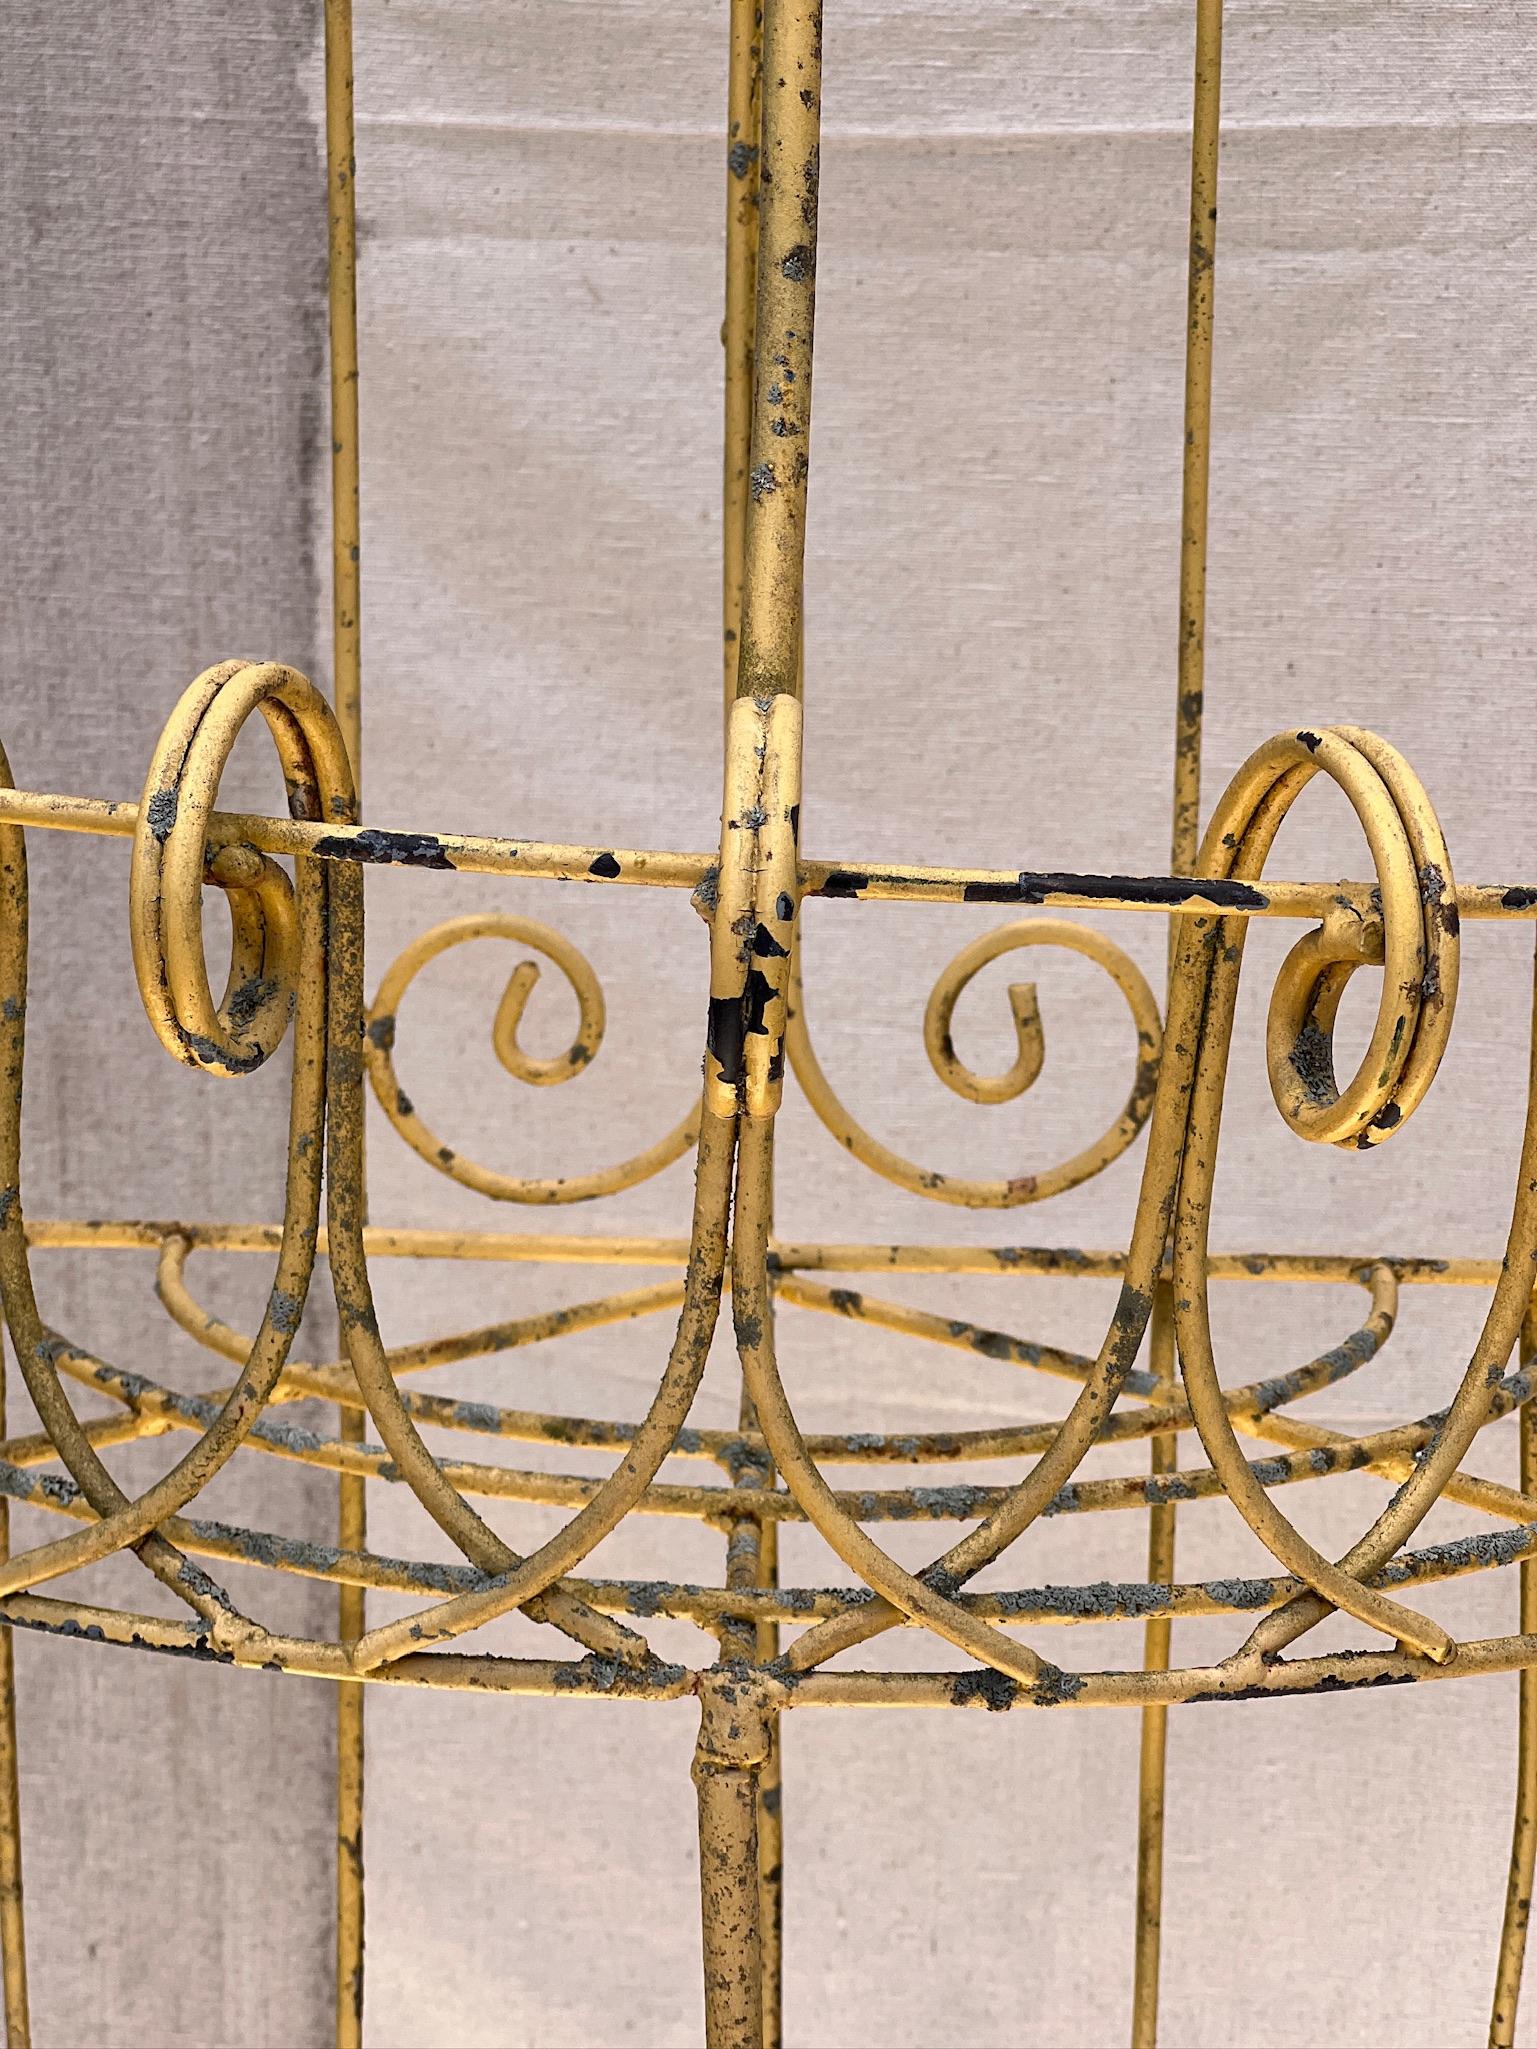 A magnificent French plant stand with three tiers, featuring an elegant demilune design. The iron frame of the stand is adorned with gracefully scrolled wire borders on each shelf. It stands on three sets of legs, each culminating in scrolled feet,